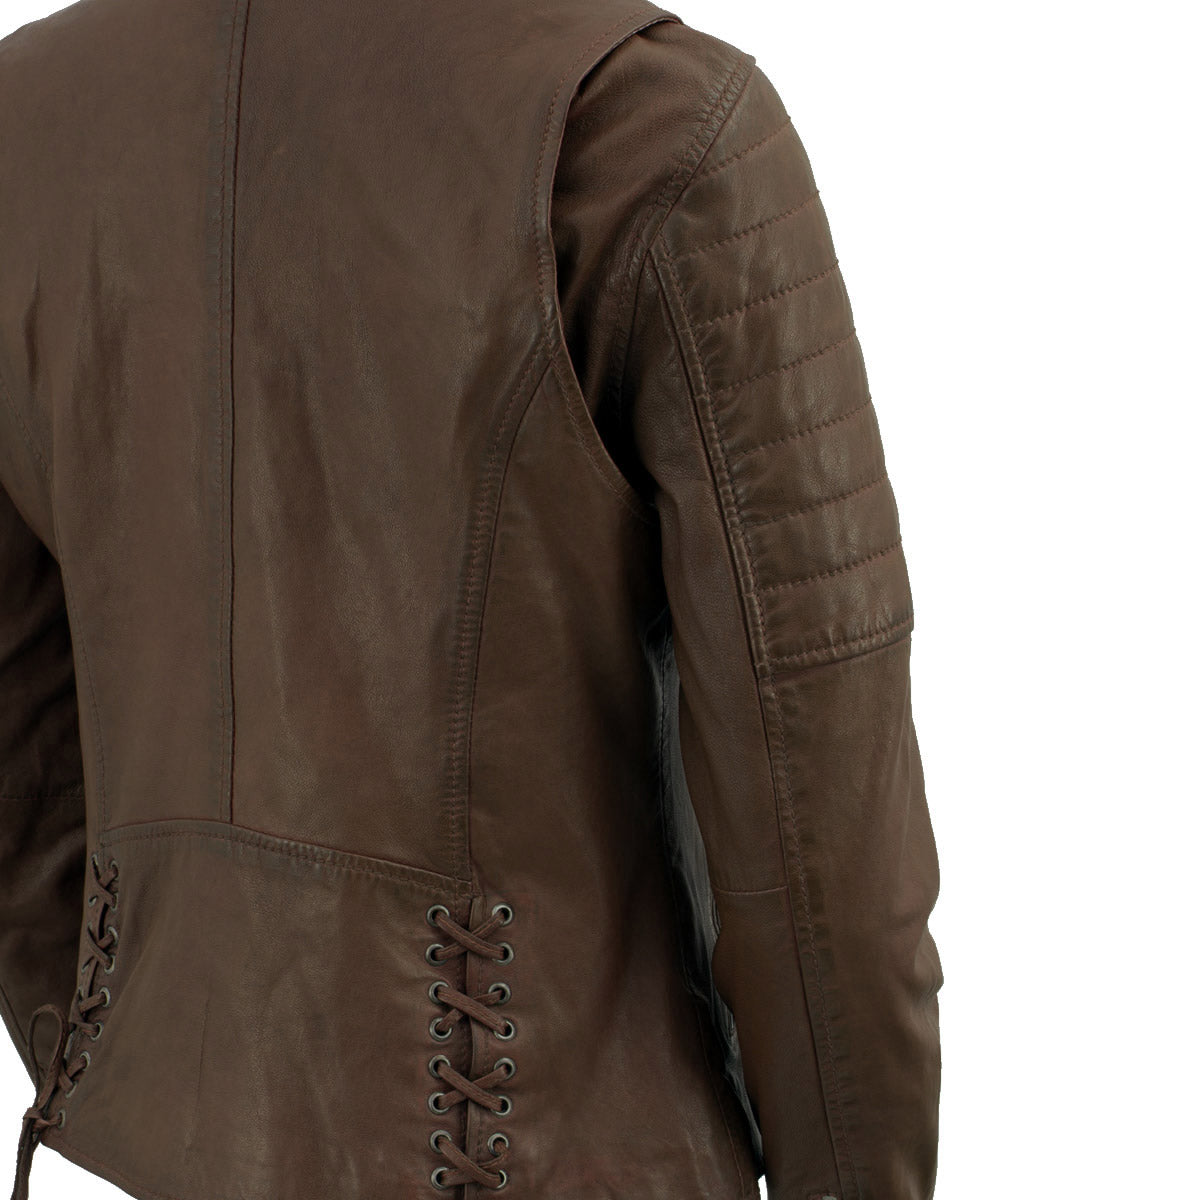 Milwaukee Leather SFL2812 Brown Vintage Motorcycle Inspired Leather Jacket for Women - Veg-Tan Fashion Jacket